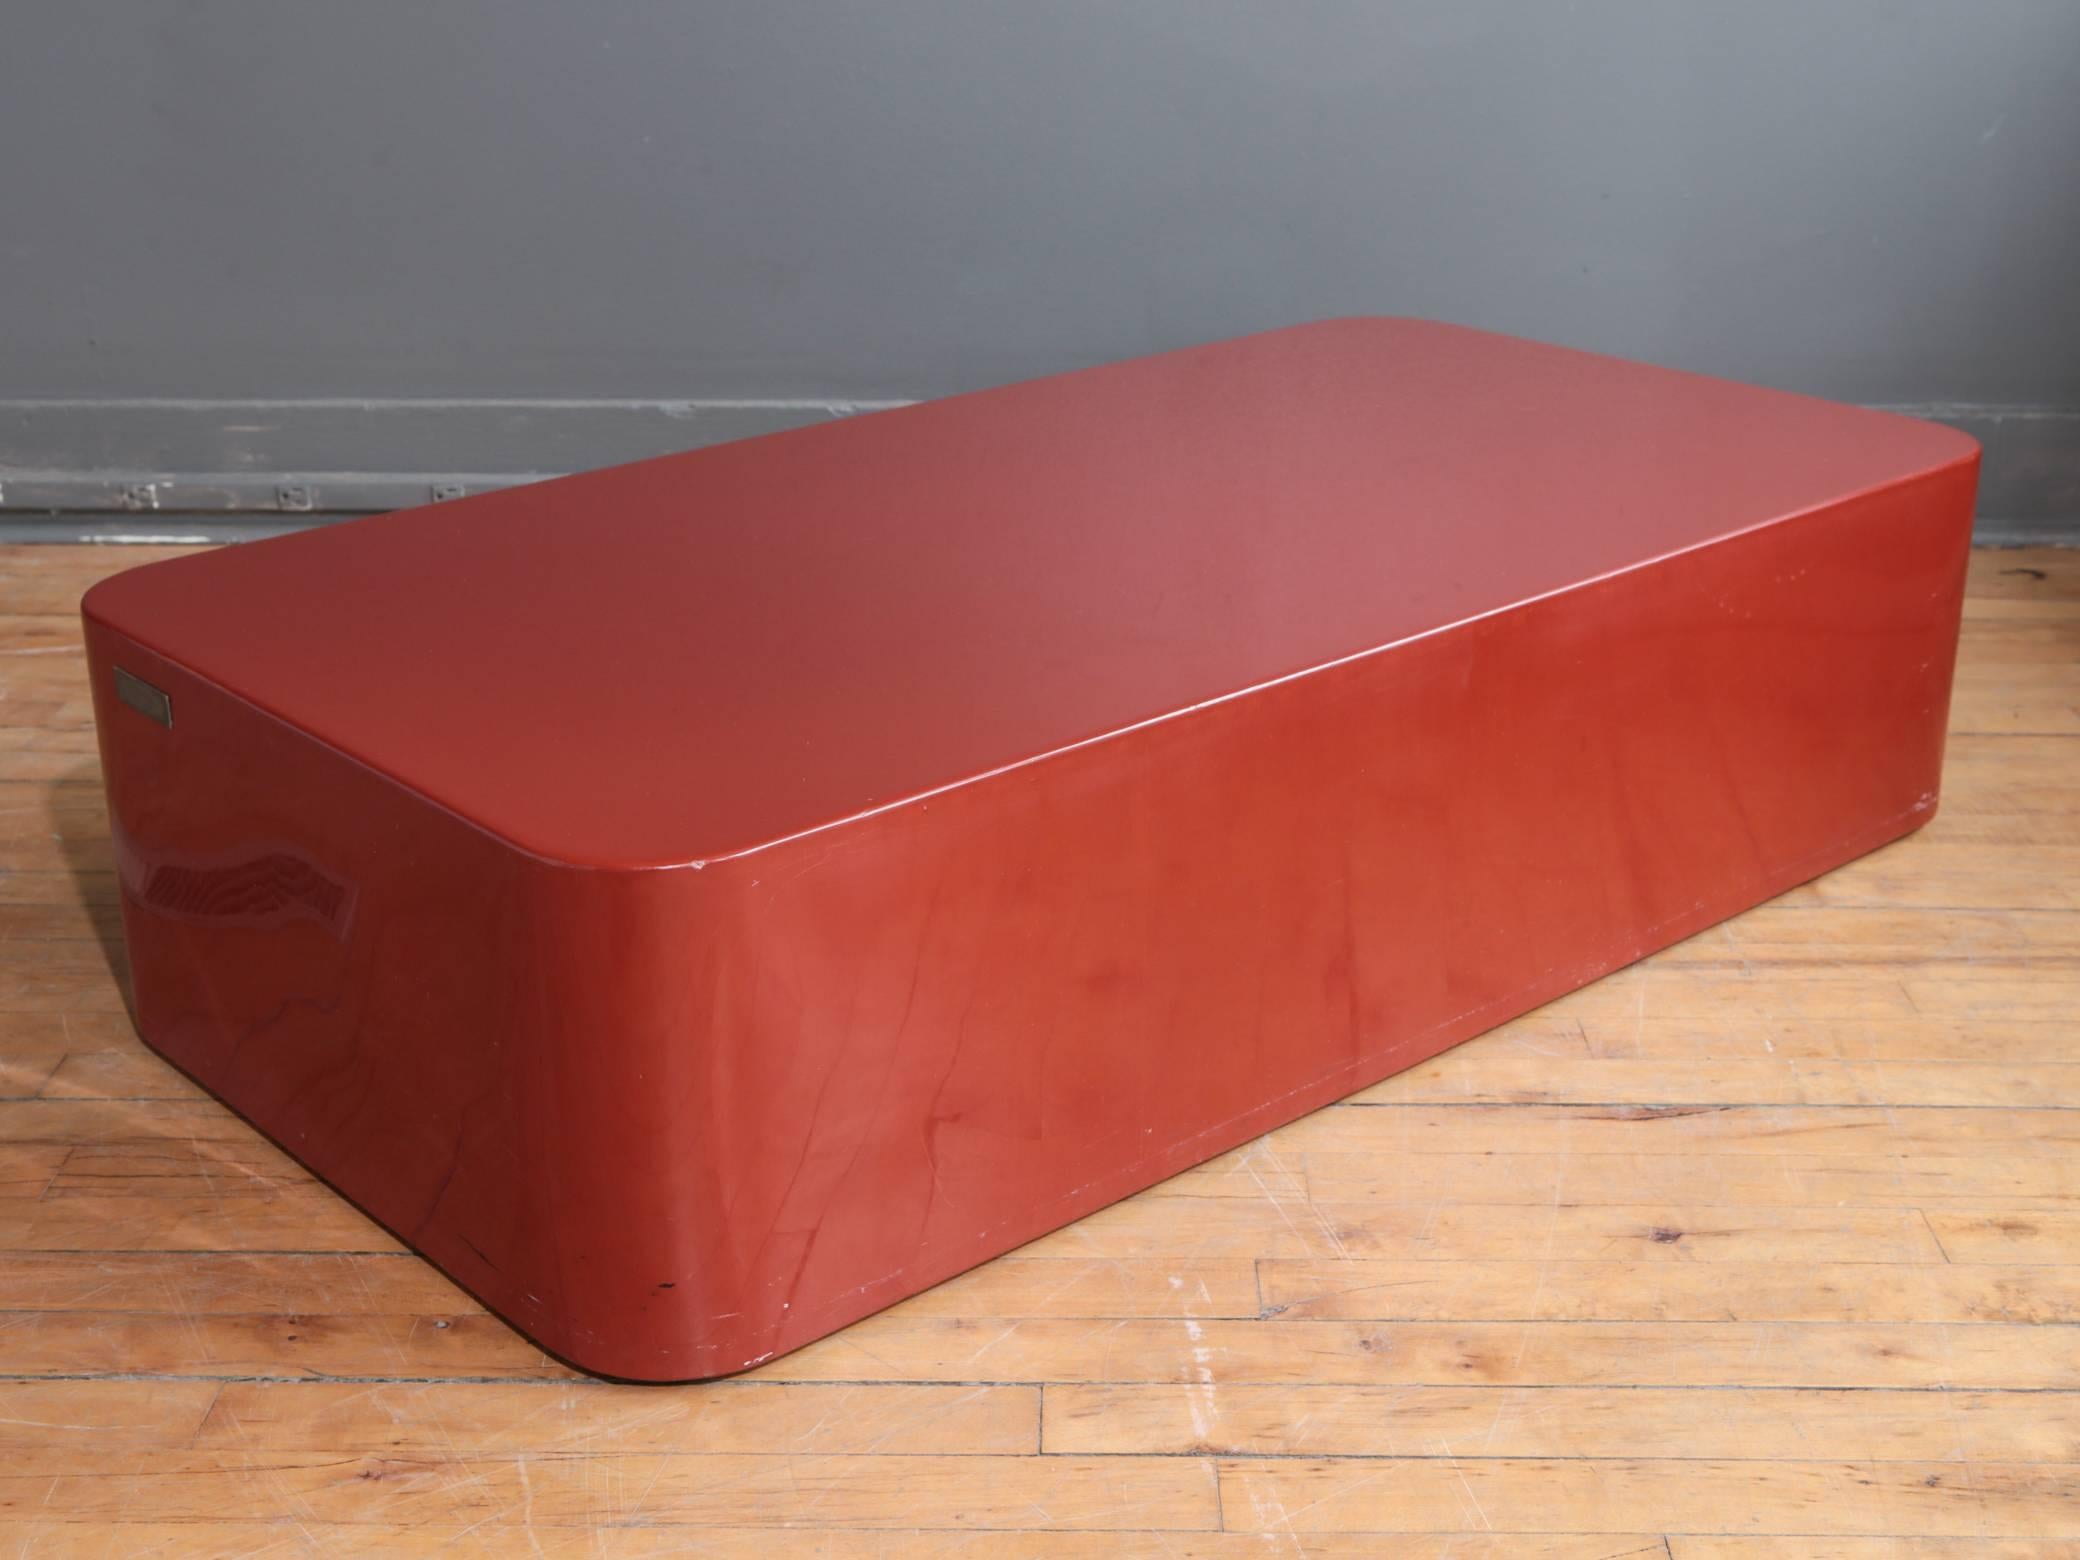 A rectangular coffee or cocktail table designed by Giacomo Passera, circa 1970s. Consisting of poured lacquer over a wood frame finished to a cinnabar red. Original brass label with facsimile Giocomo Passera signature present. Marked "Made in